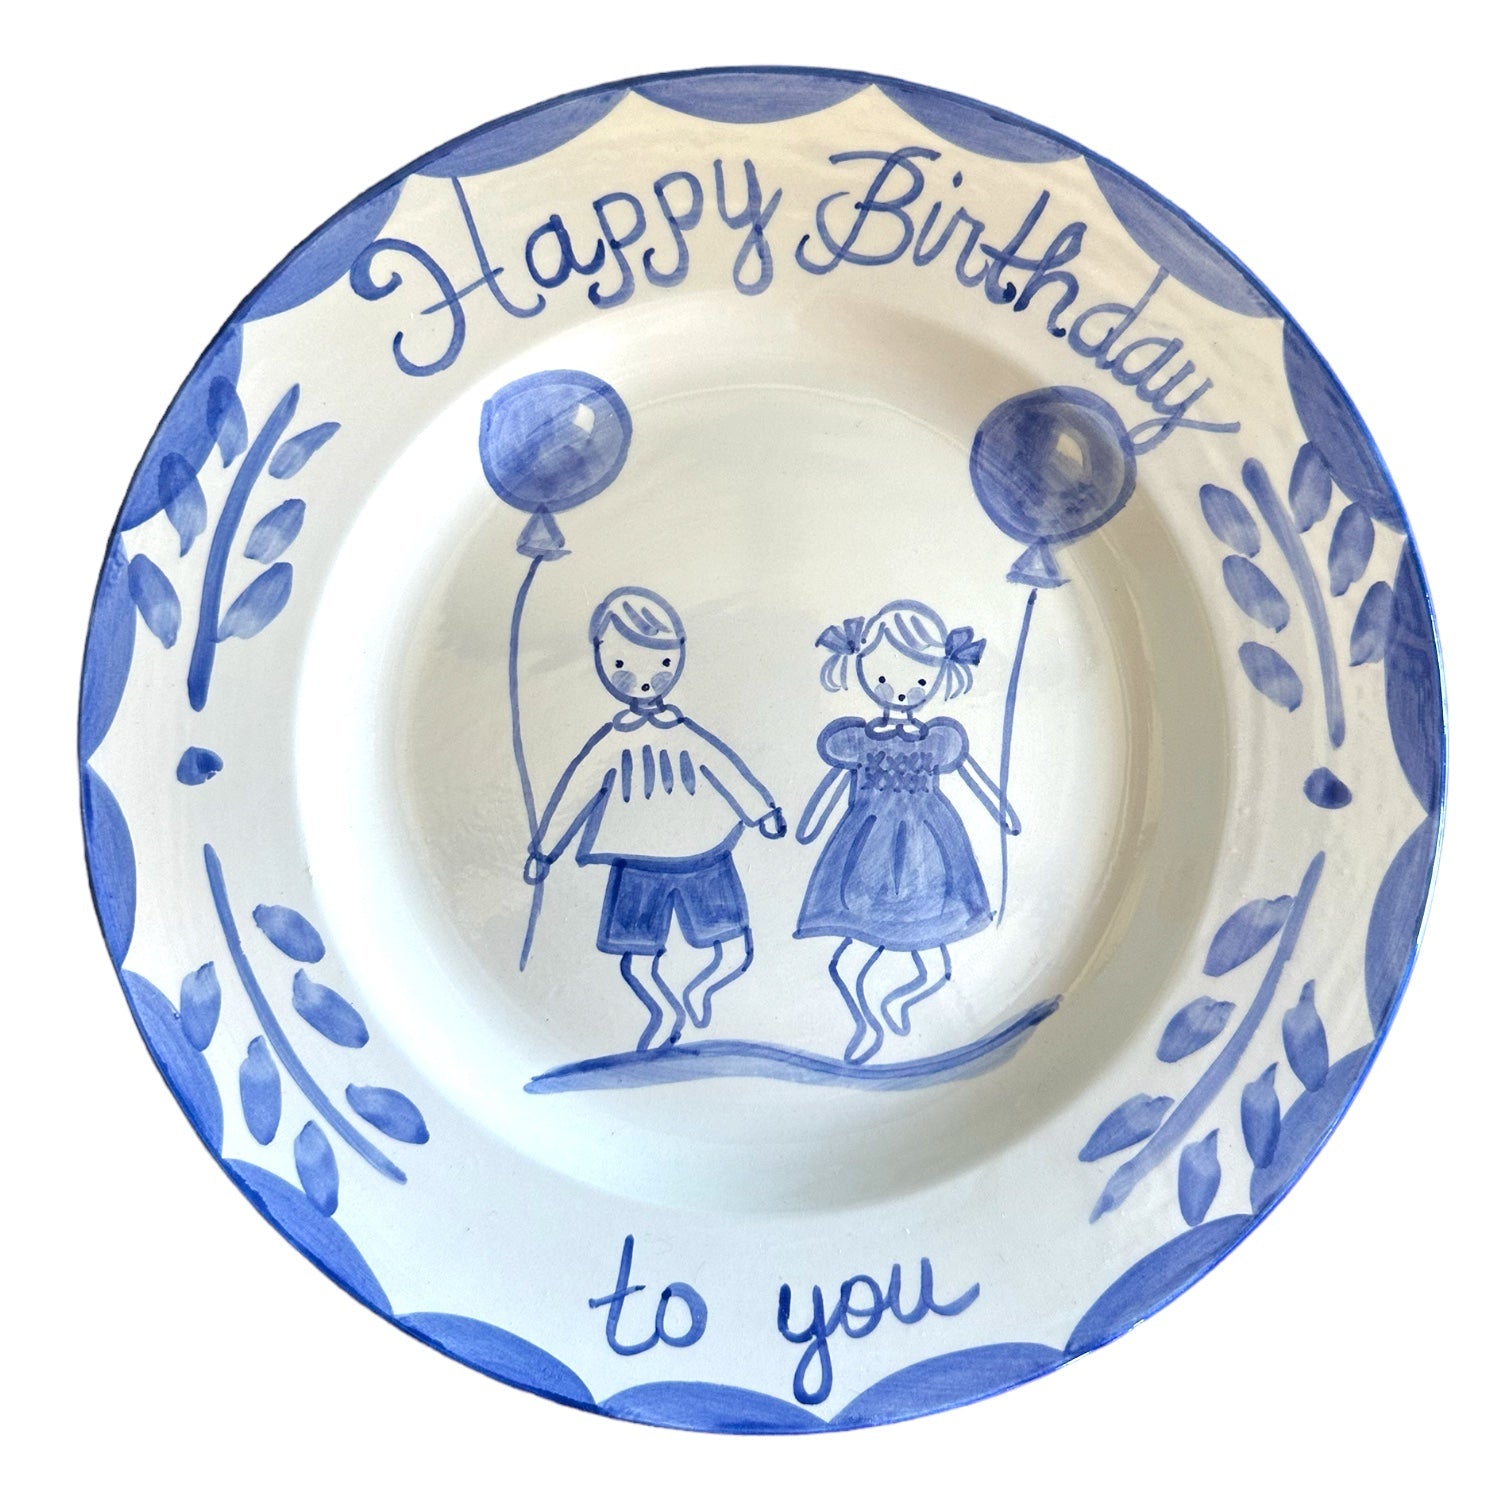 Everyone’s Birthday Plate - Blue and white - Premium  from Tricia Lowenfield Shop 